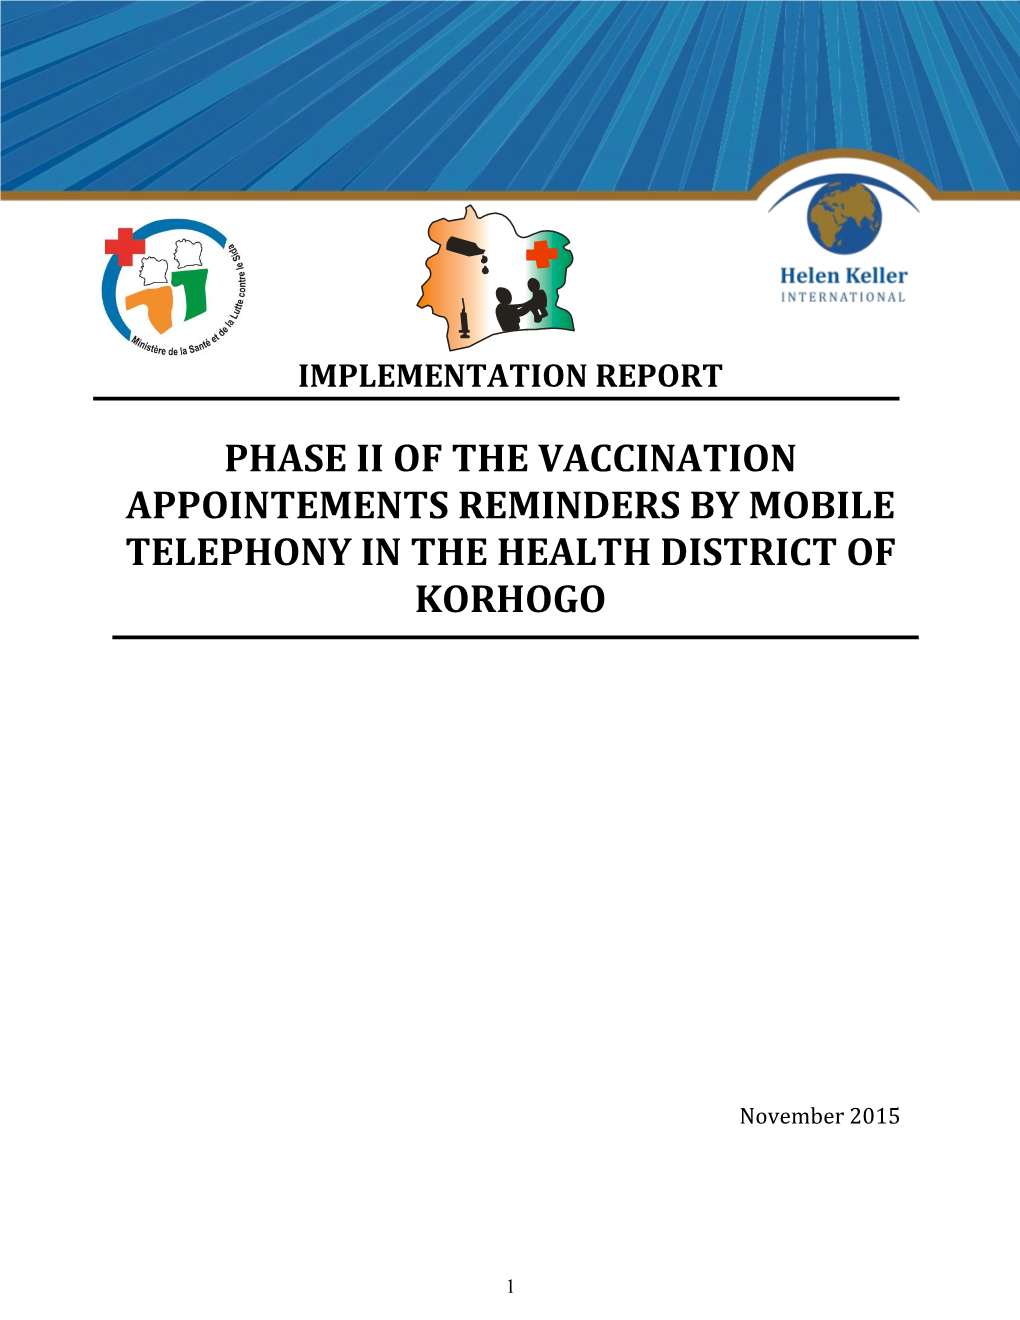 Phase Ii of the Vaccination Appointements Reminders by Mobile Telephony in the Health District of Korhogo